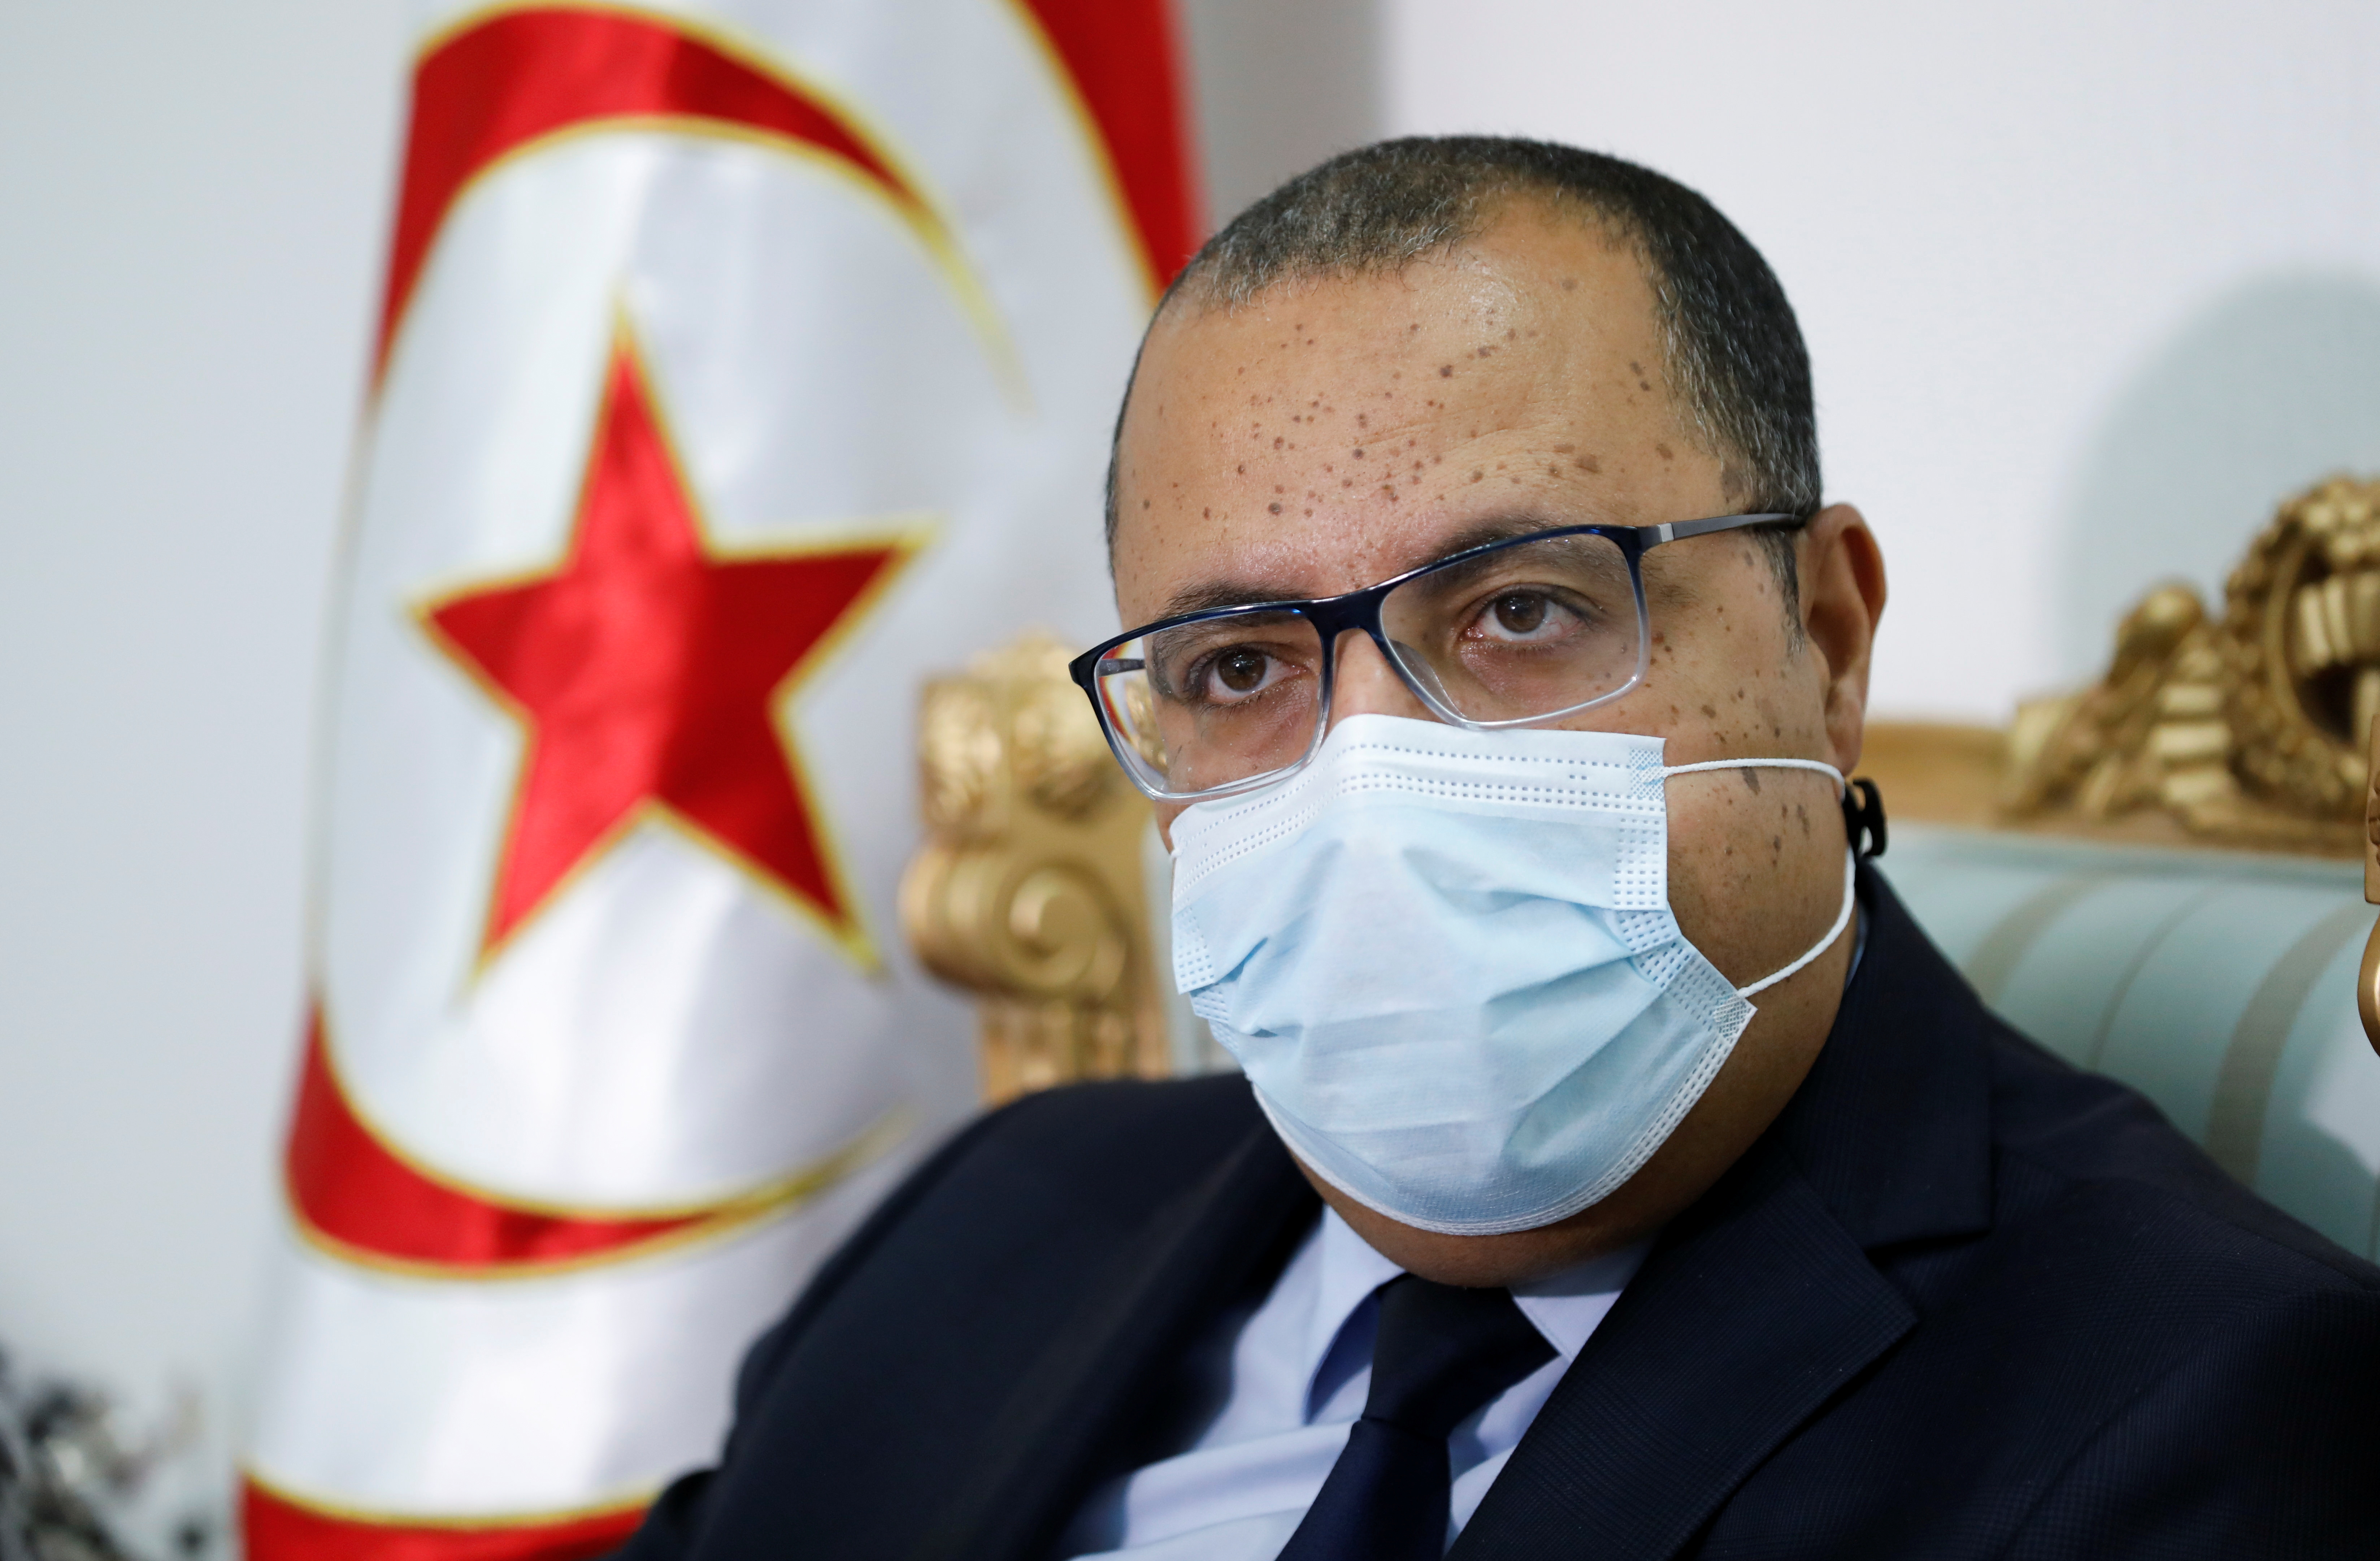 Tunisian Prime Minister Hichem Mechichi attends an interview with Reuters in Tunis